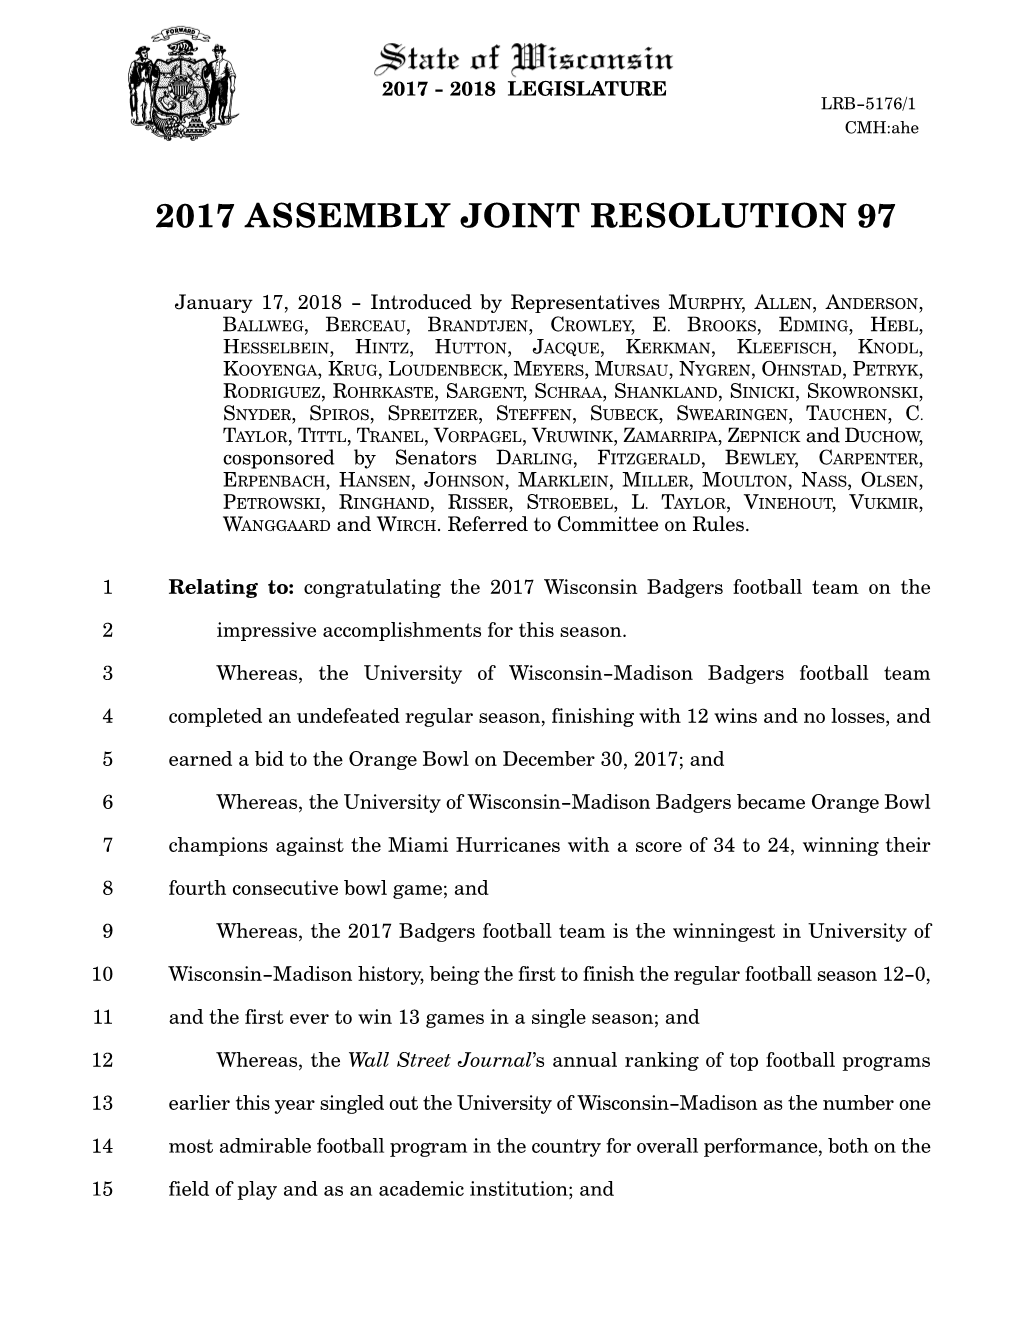 2017 Assembly Joint Resolution 97